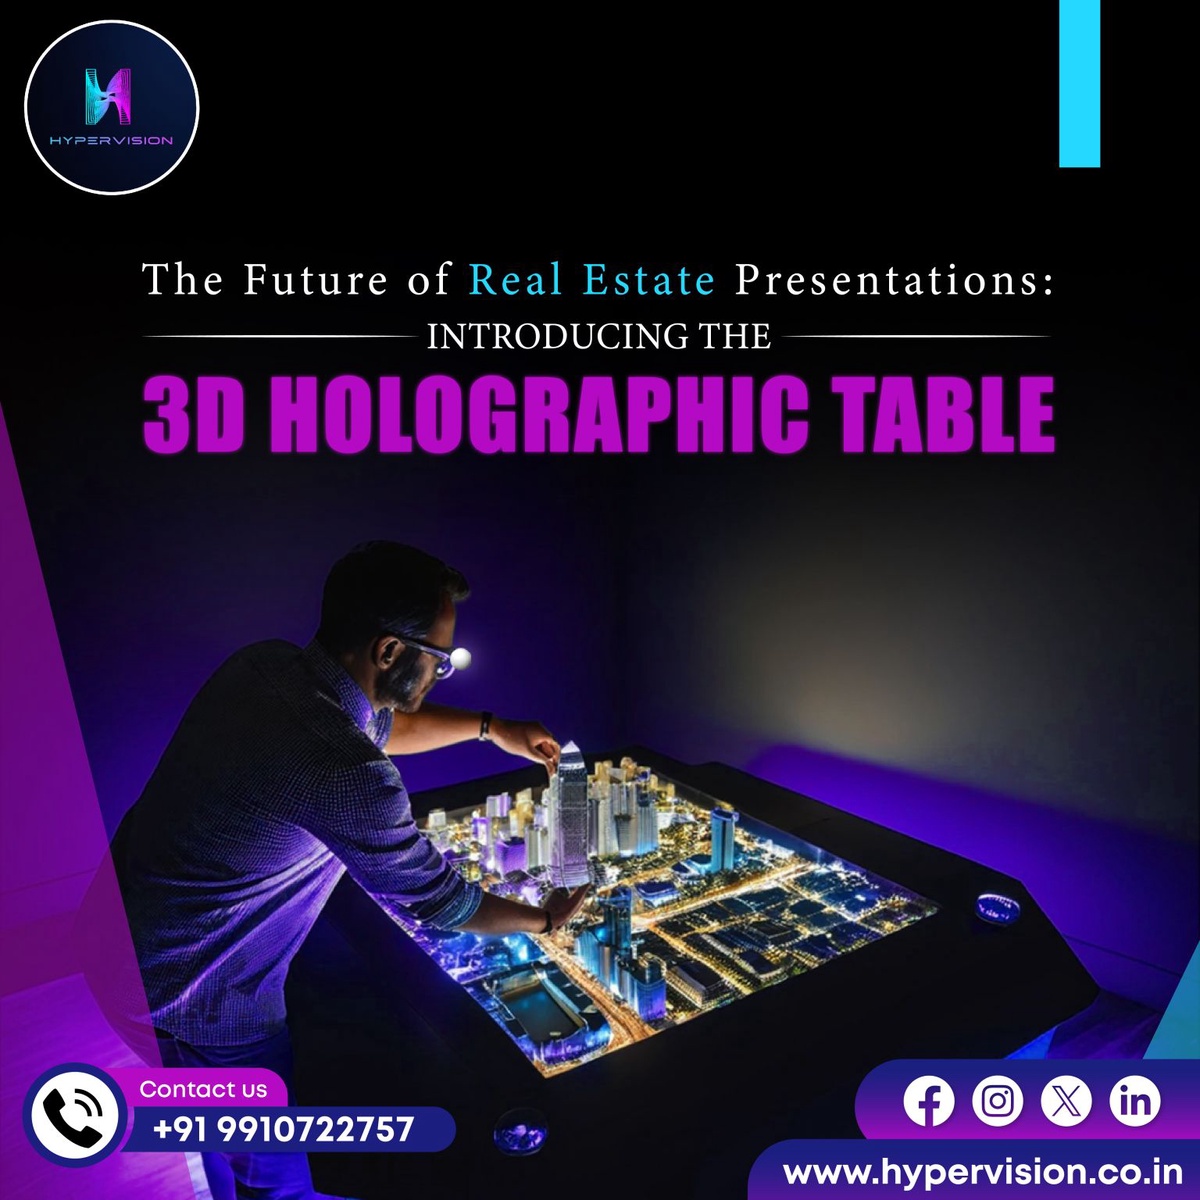 The Future of Real Estate Presentations : INTRODUCING THE 3D HOLOGRAPHIC TABLE